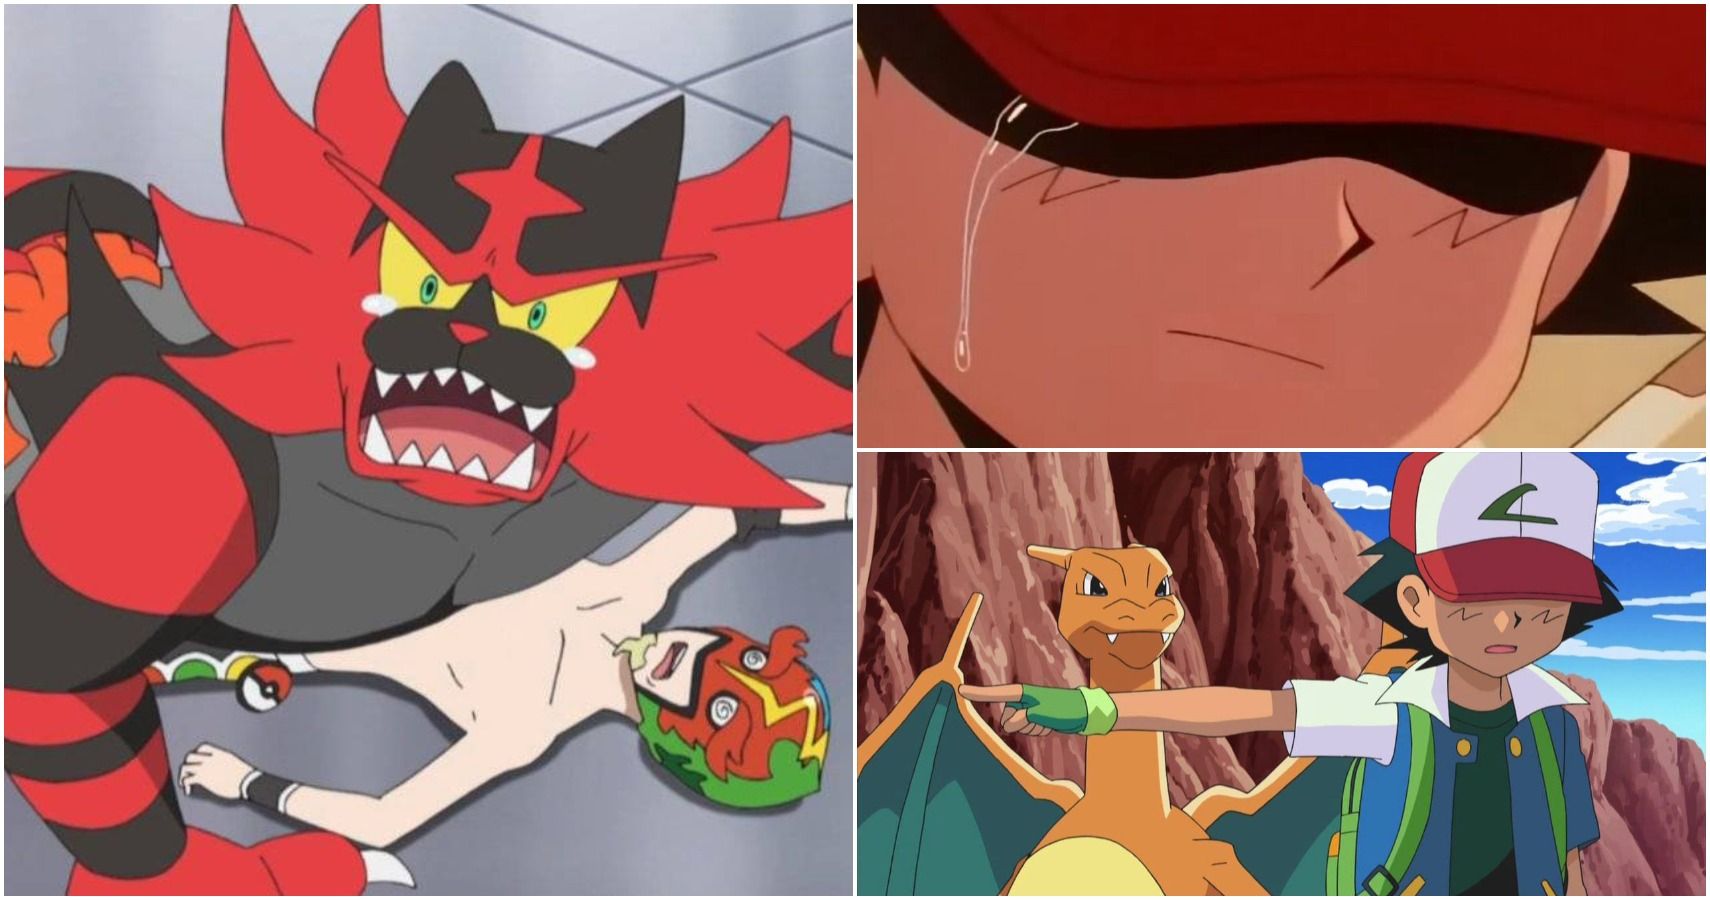 10 Fire-type Pokemon With The Most Weaknesses (And What They’re Weak To)